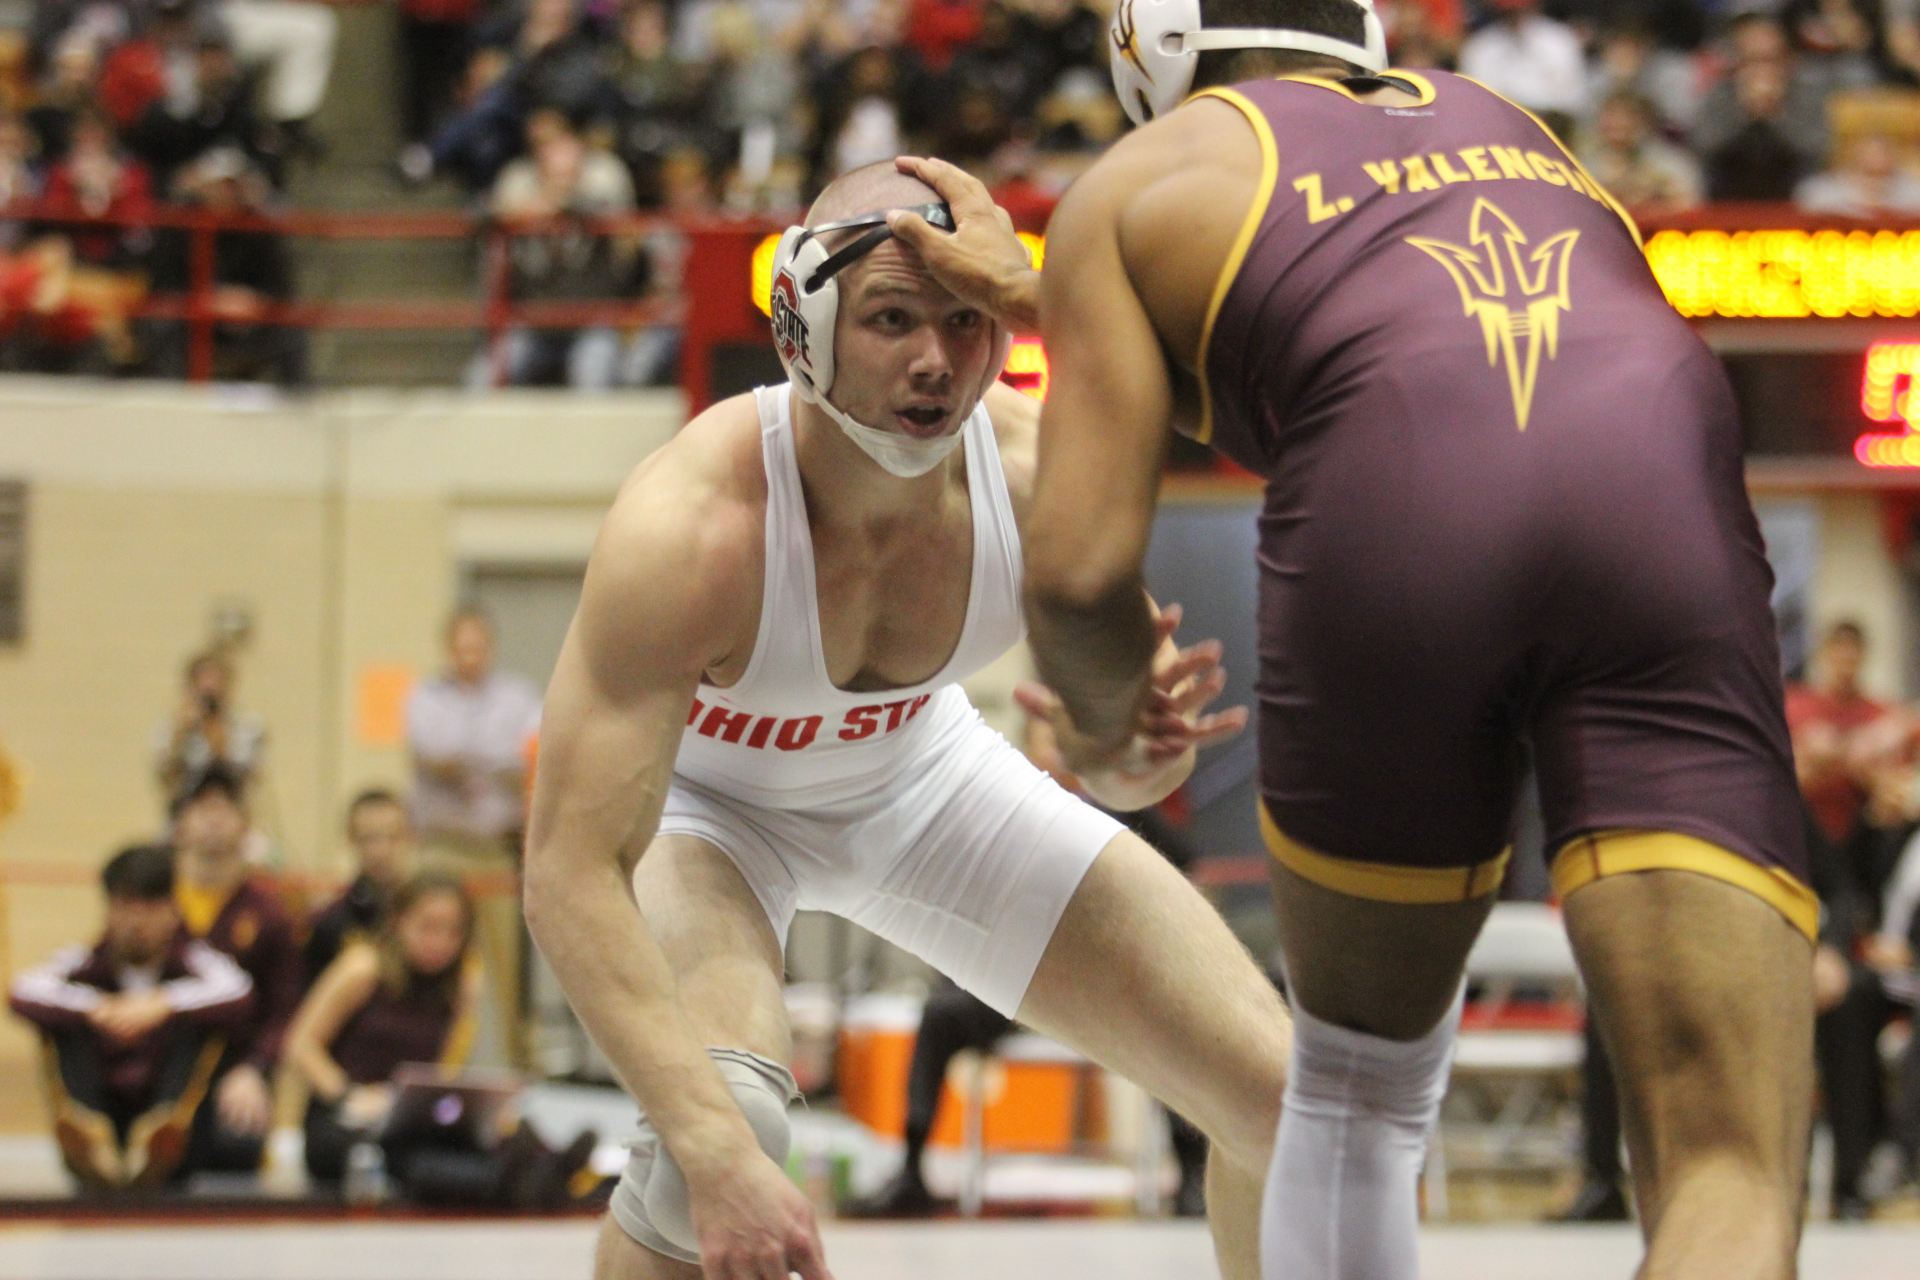 Wrestling: Ohio State defeats Arizona State 31-12 in home-opening dual meet | The Lantern1920 x 1280